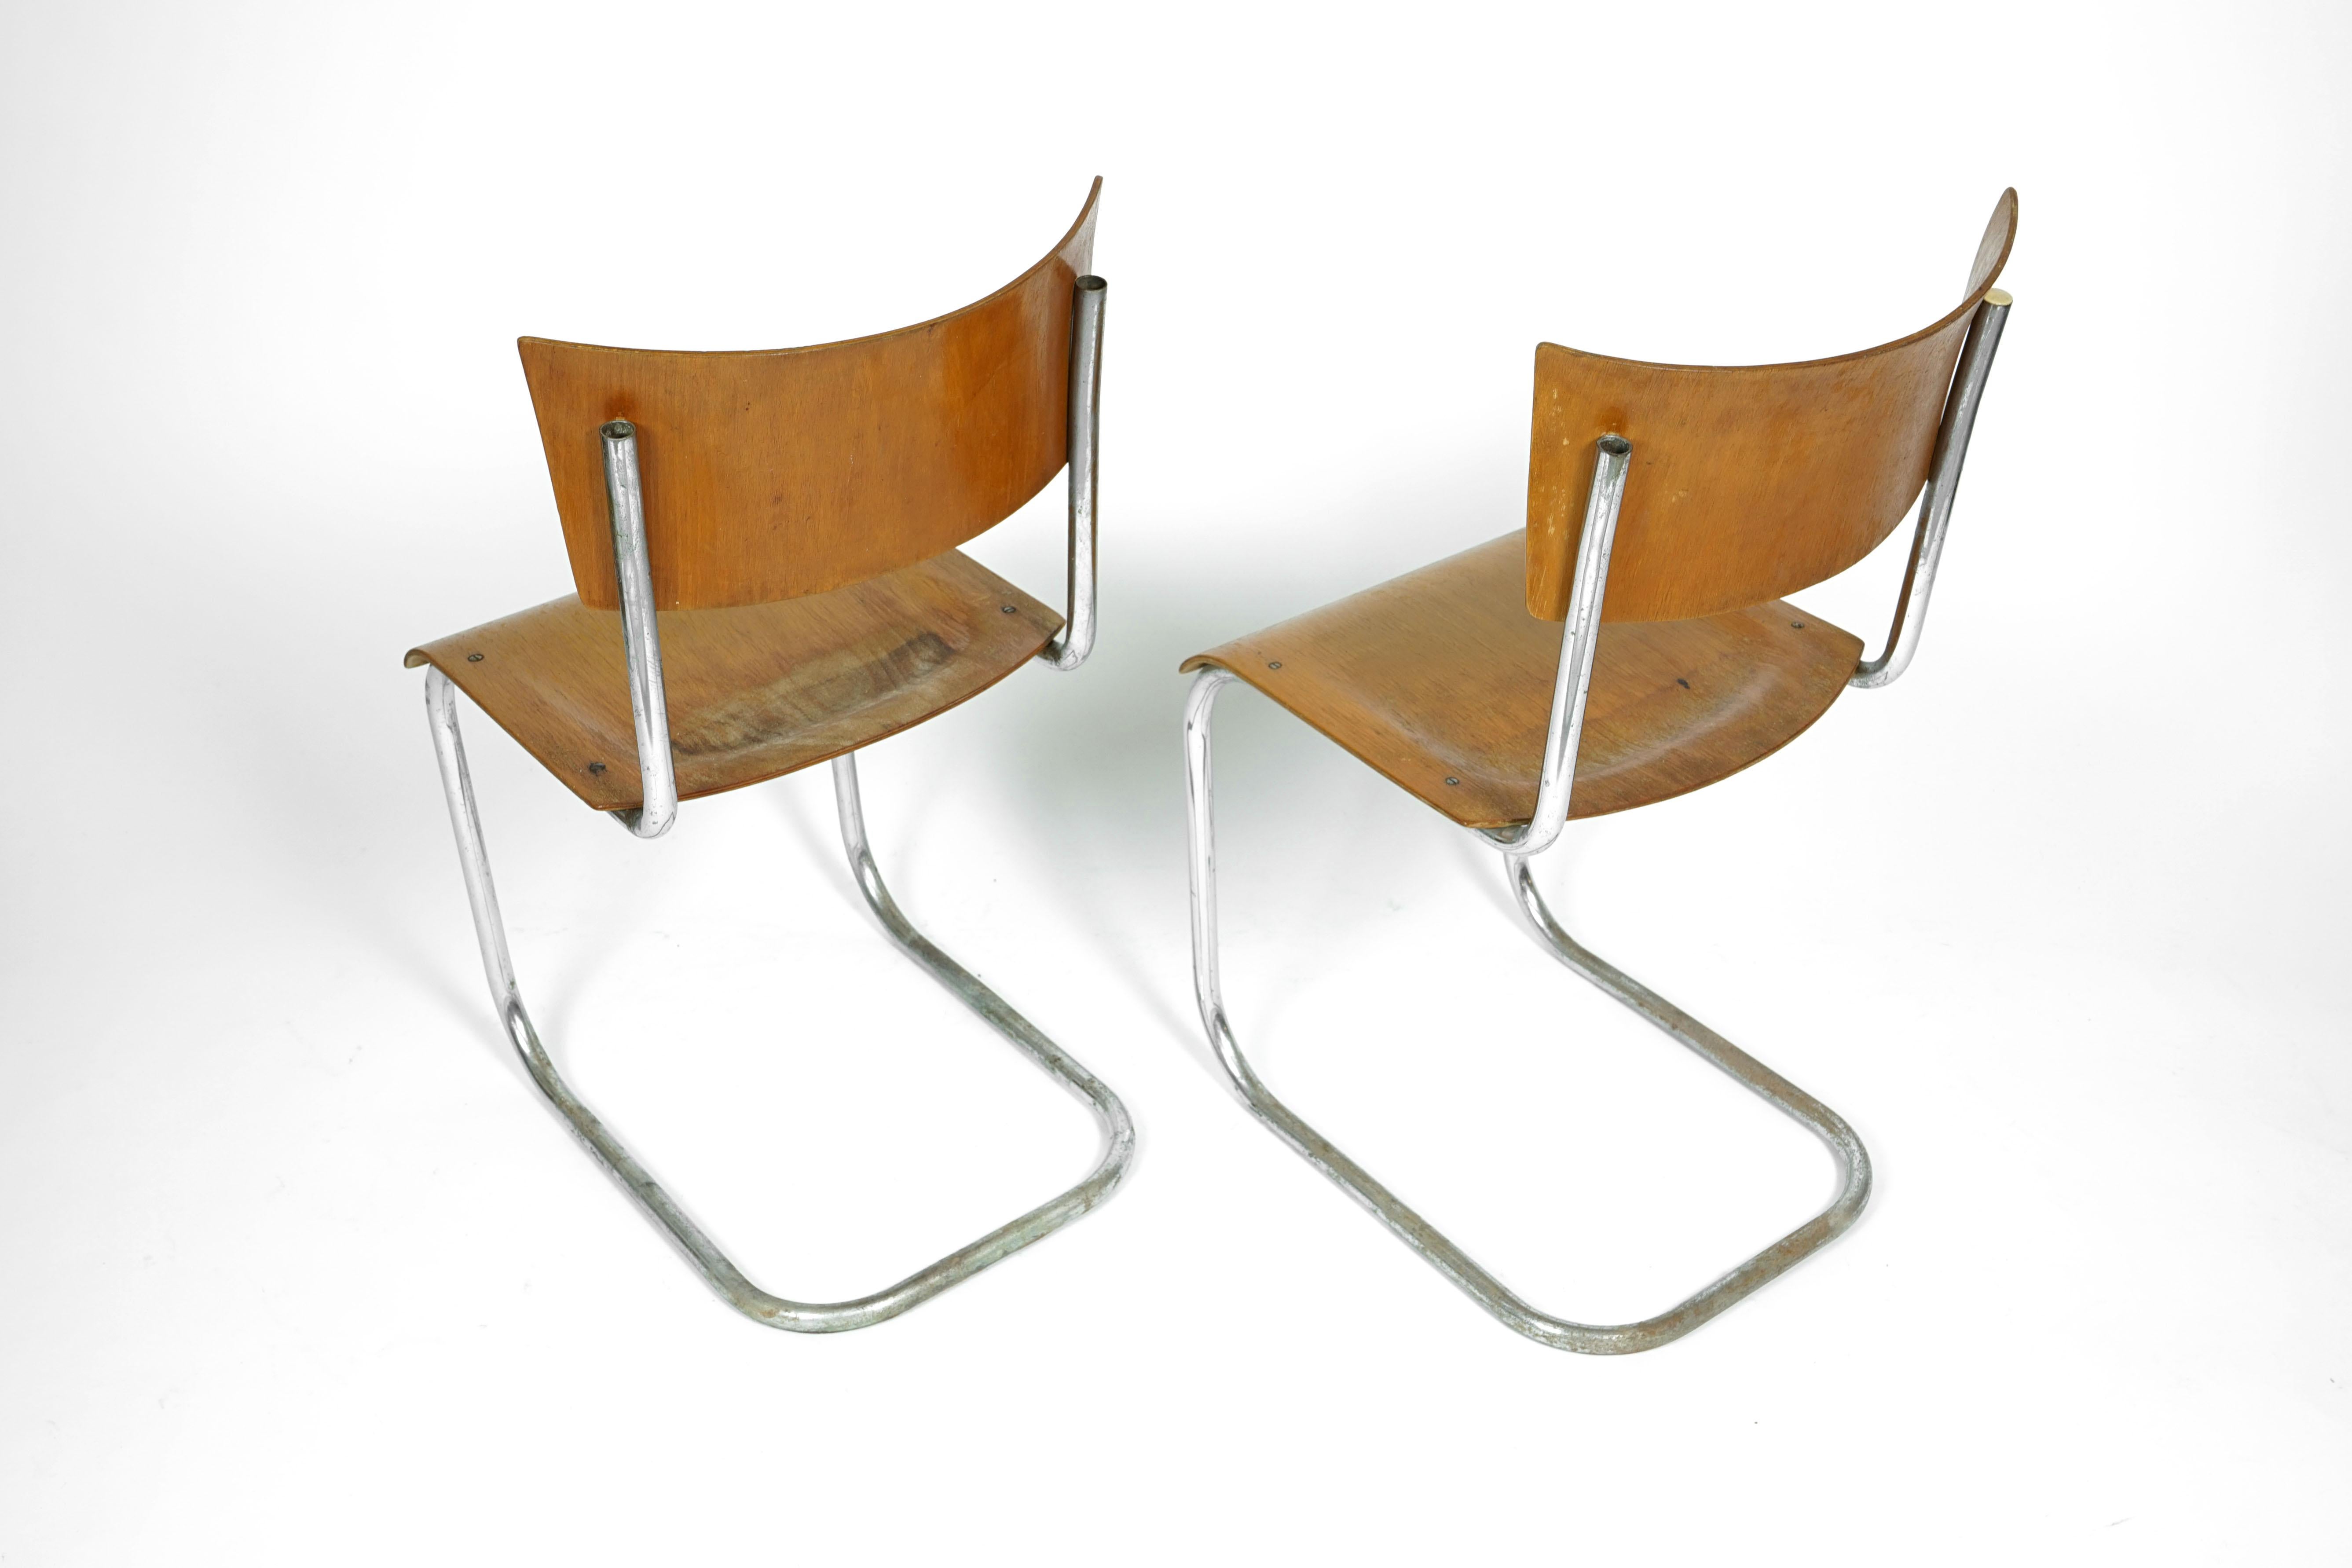 Bauhaus Plywood Cantilever Tubular Chairs Mart Stam, 1920s For Sale